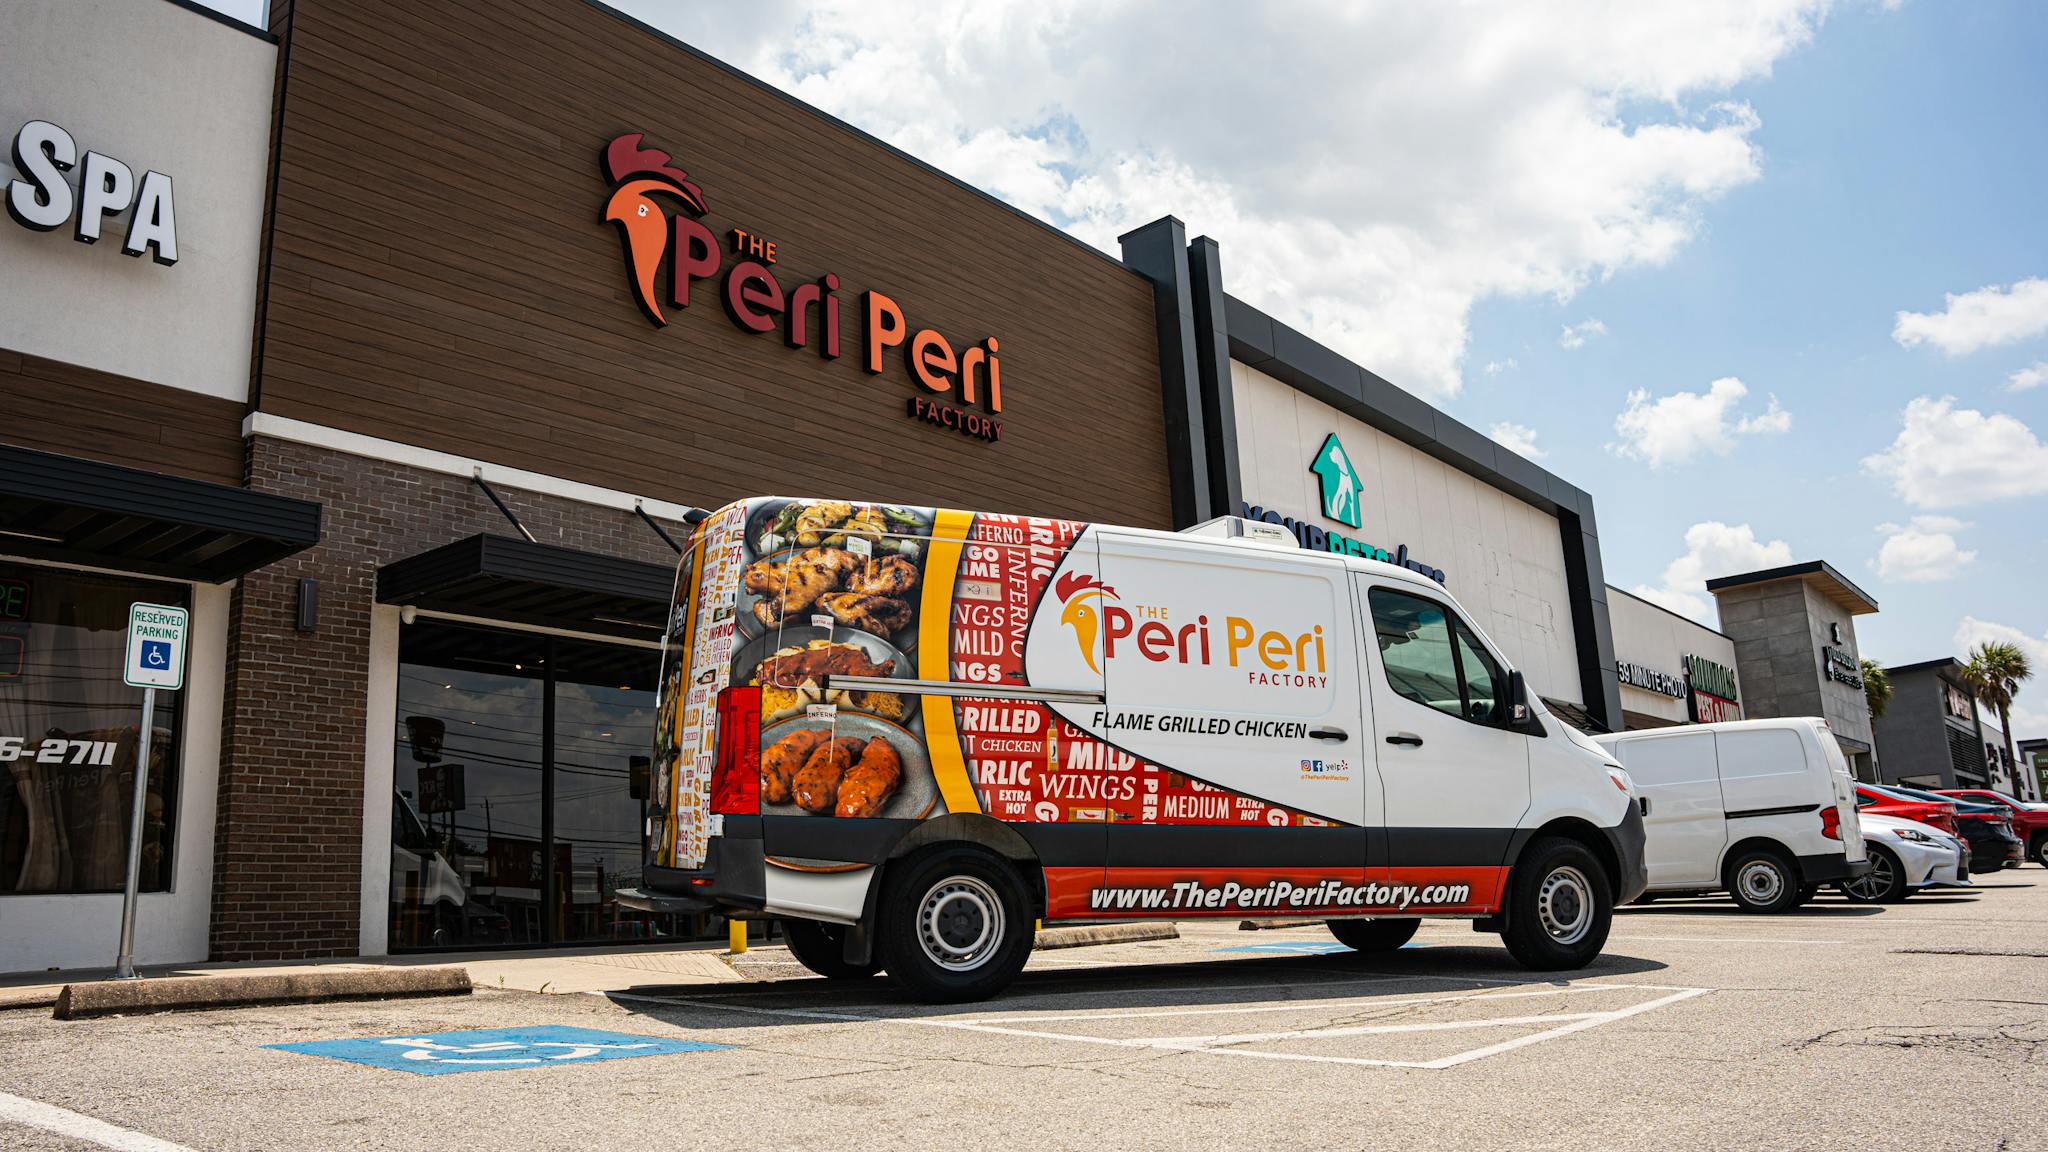 A Peri Peri factory truck parked in front of the restaurant building